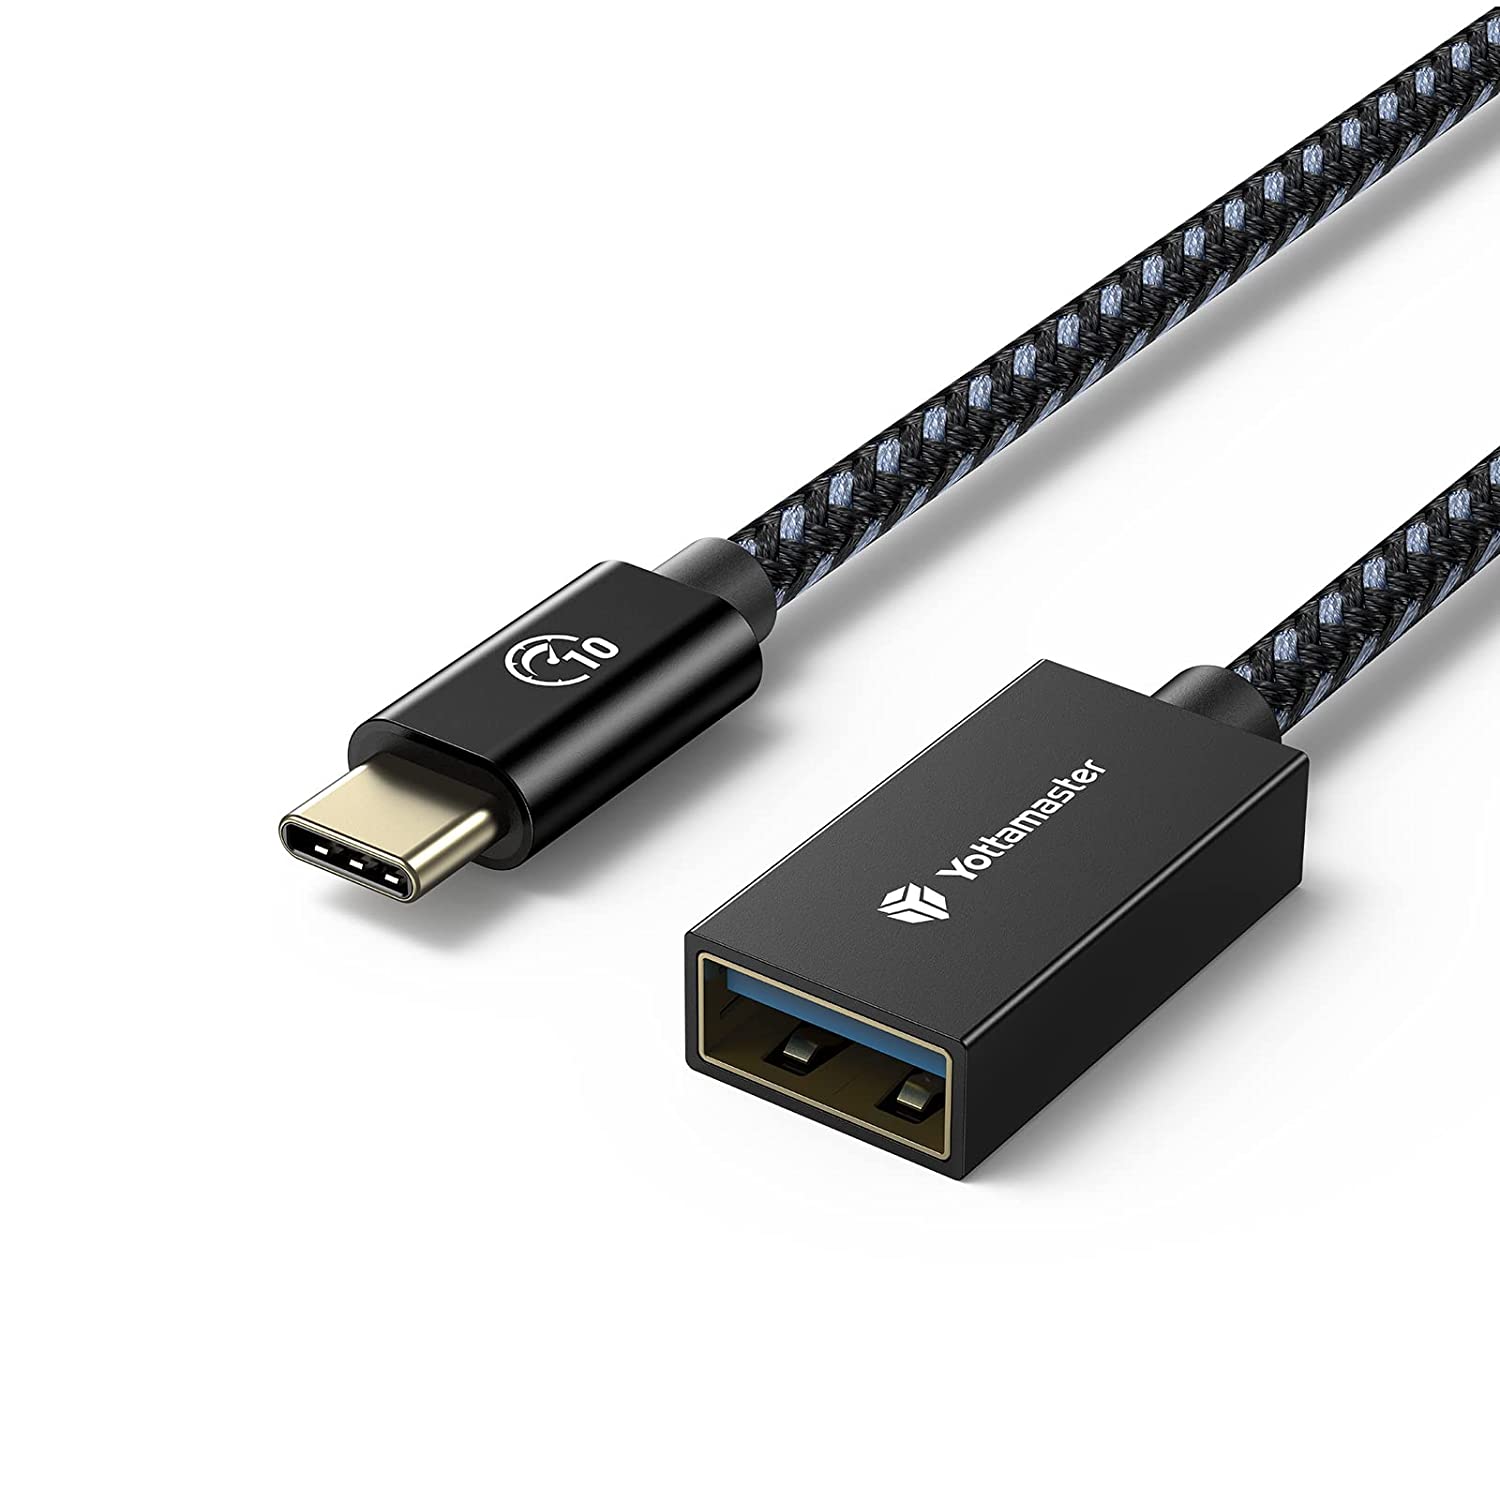 Yottamaster USB3.1 Gen 2 Type C to USB A OTG Cable, 10Gbps